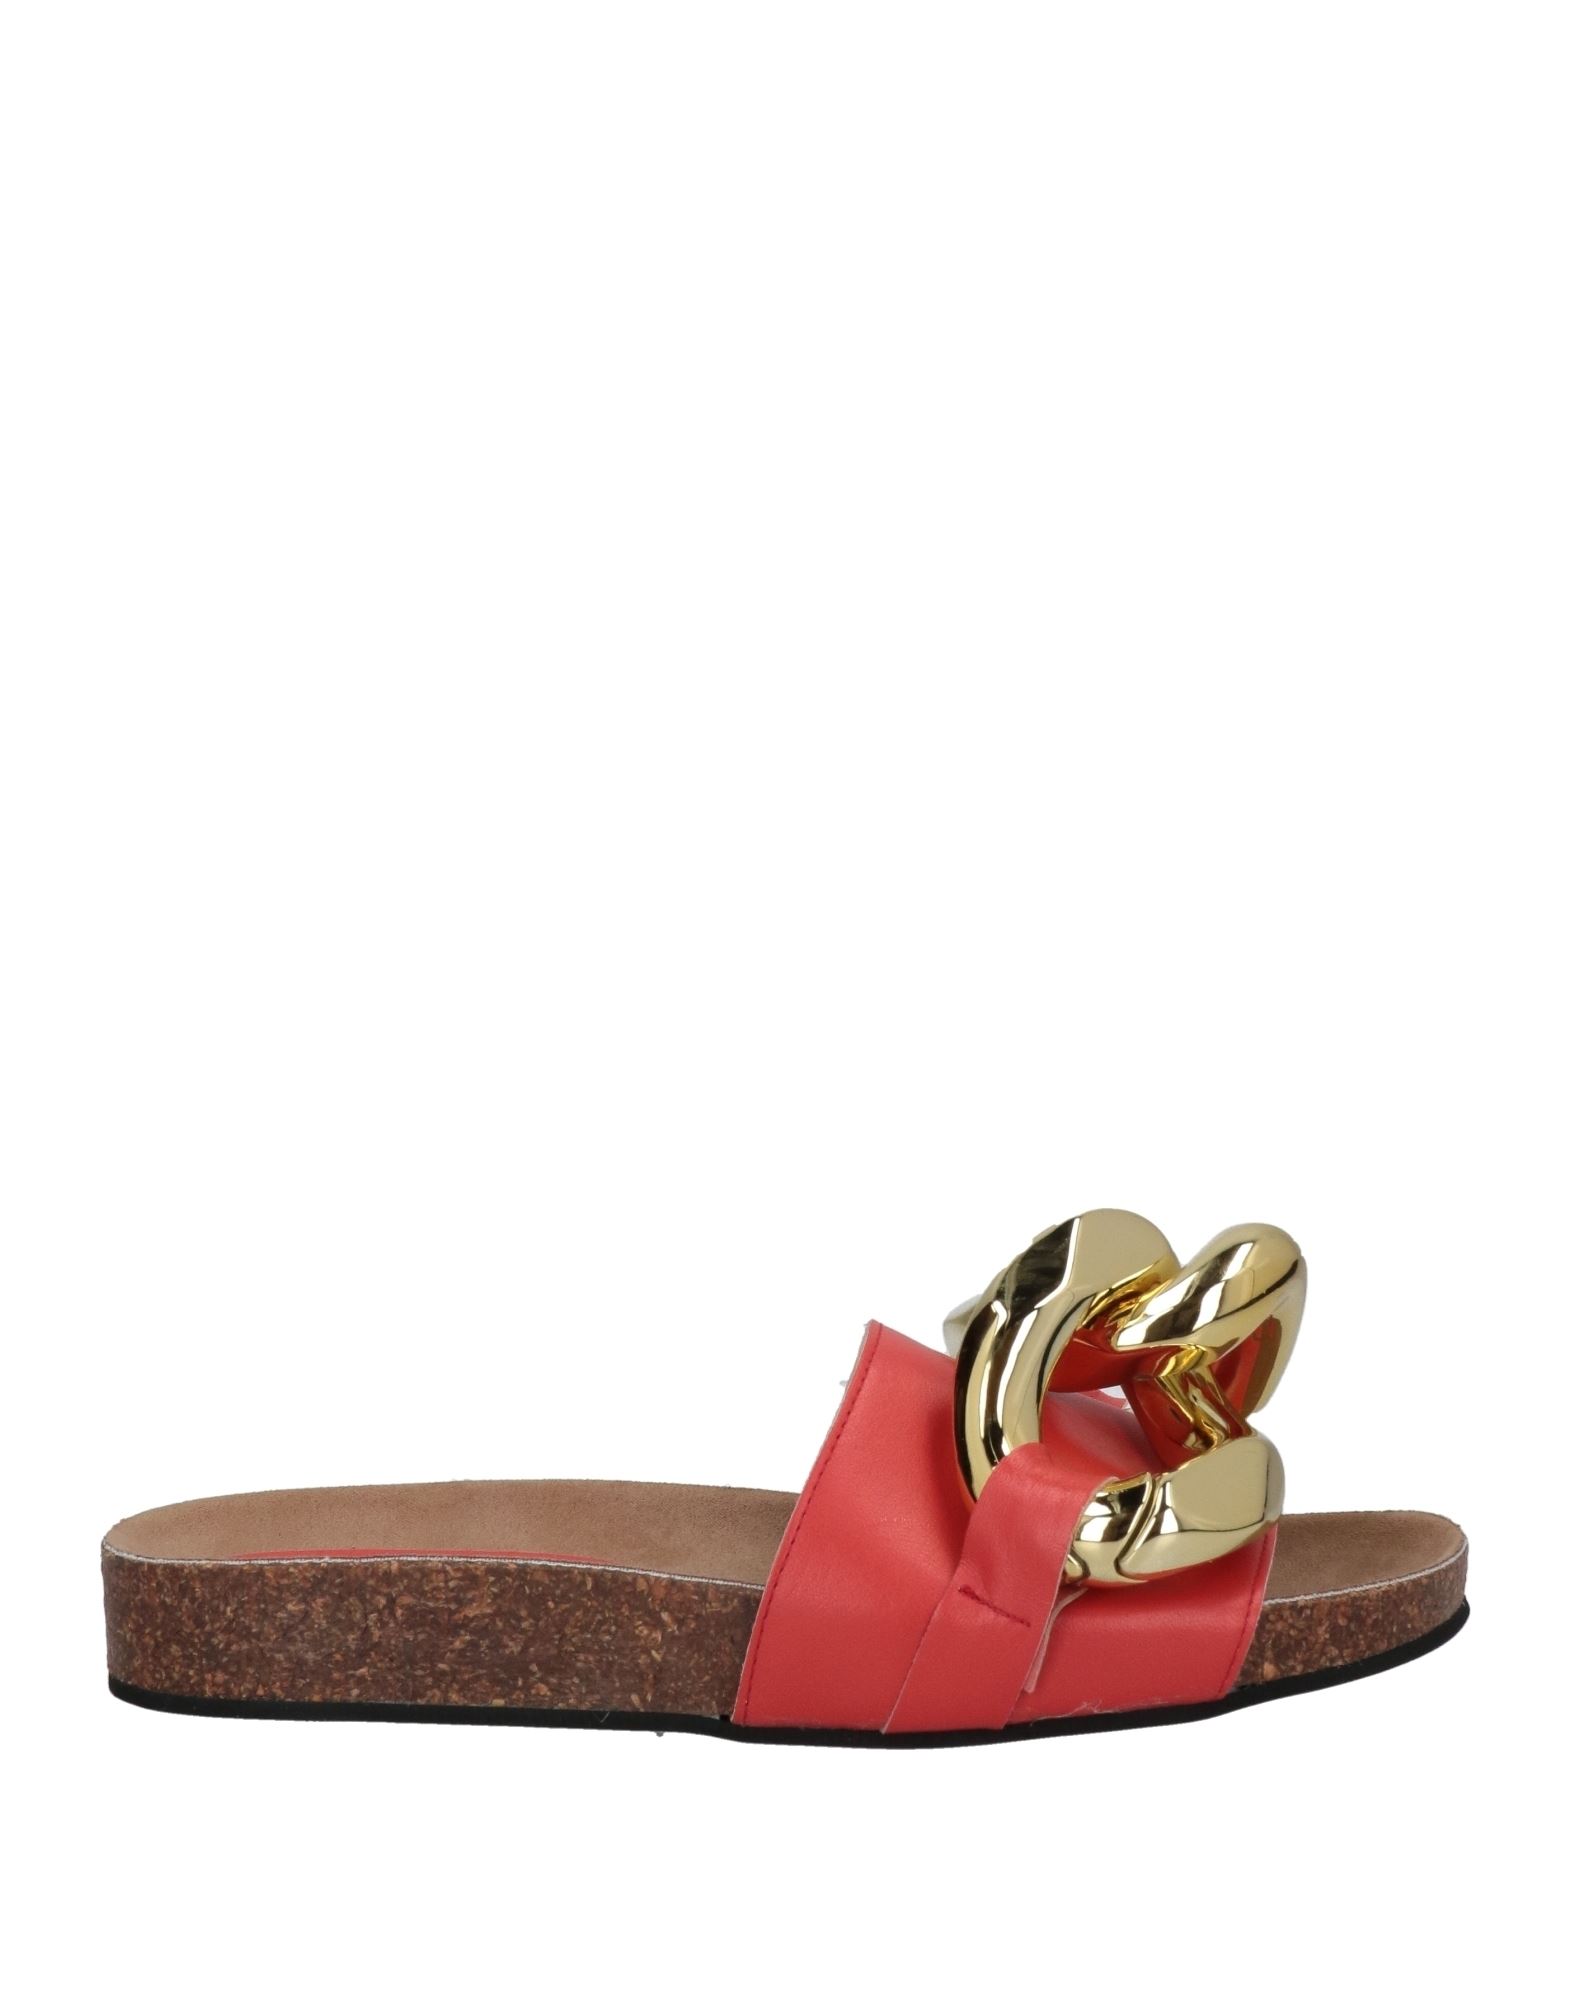 Vivian Sandals In Tomato Red